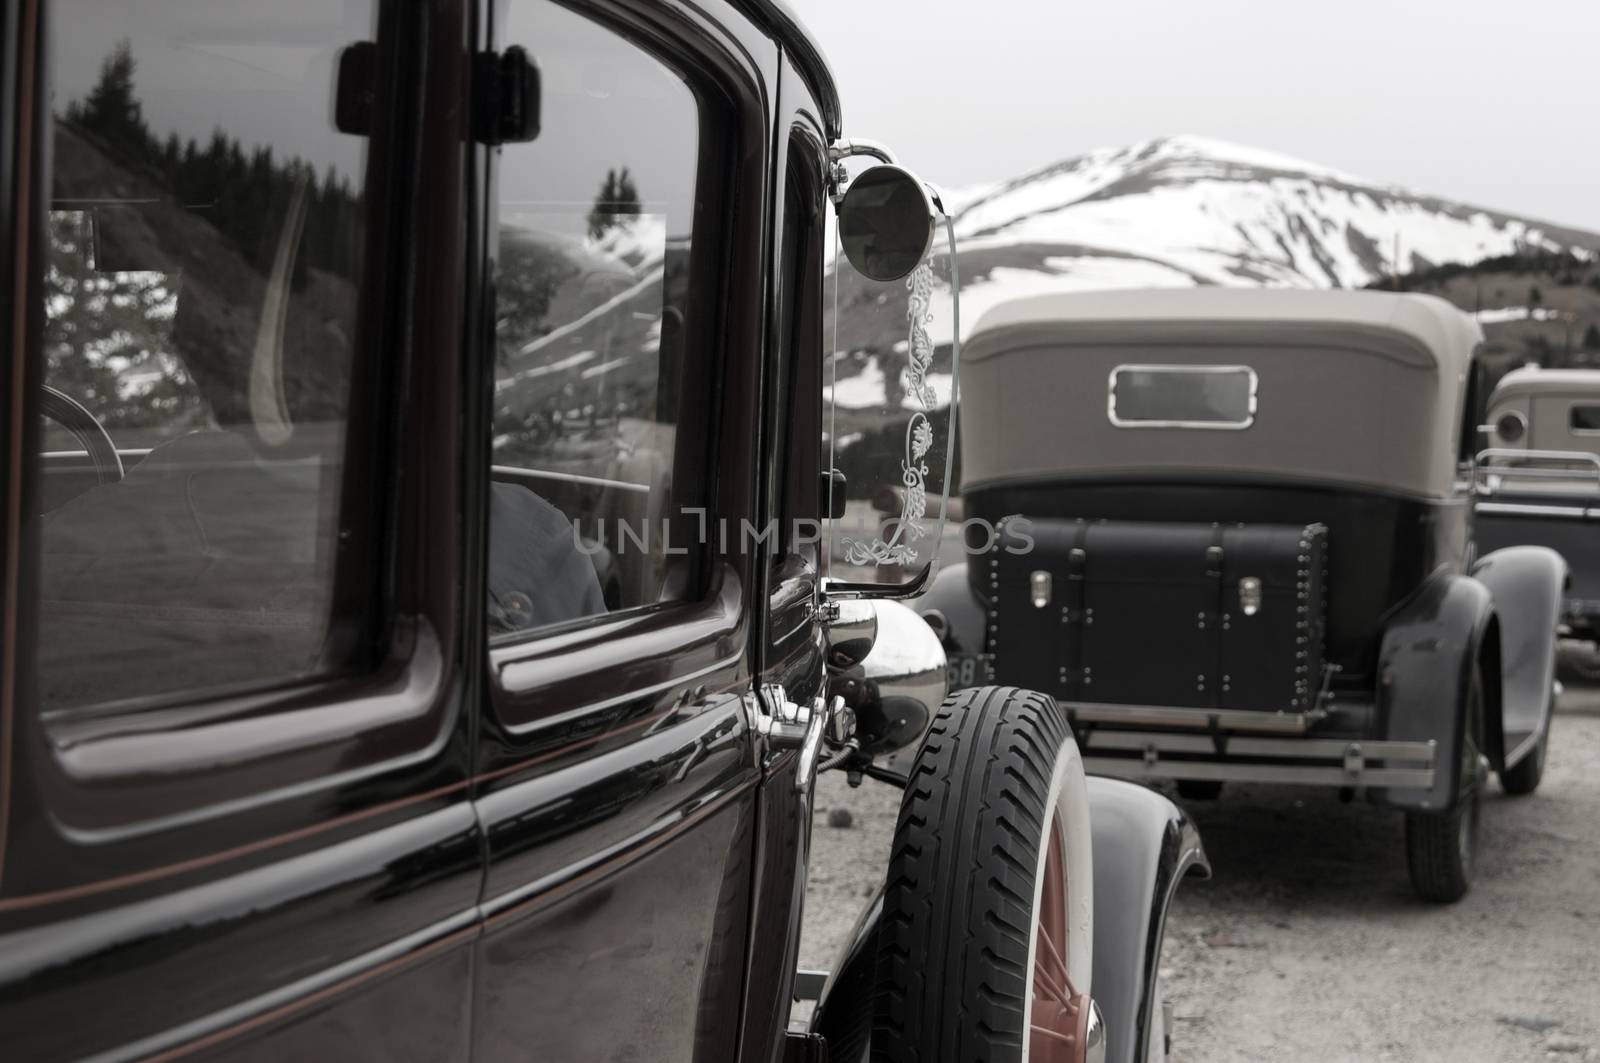 Vintage Vehicles by welcomia